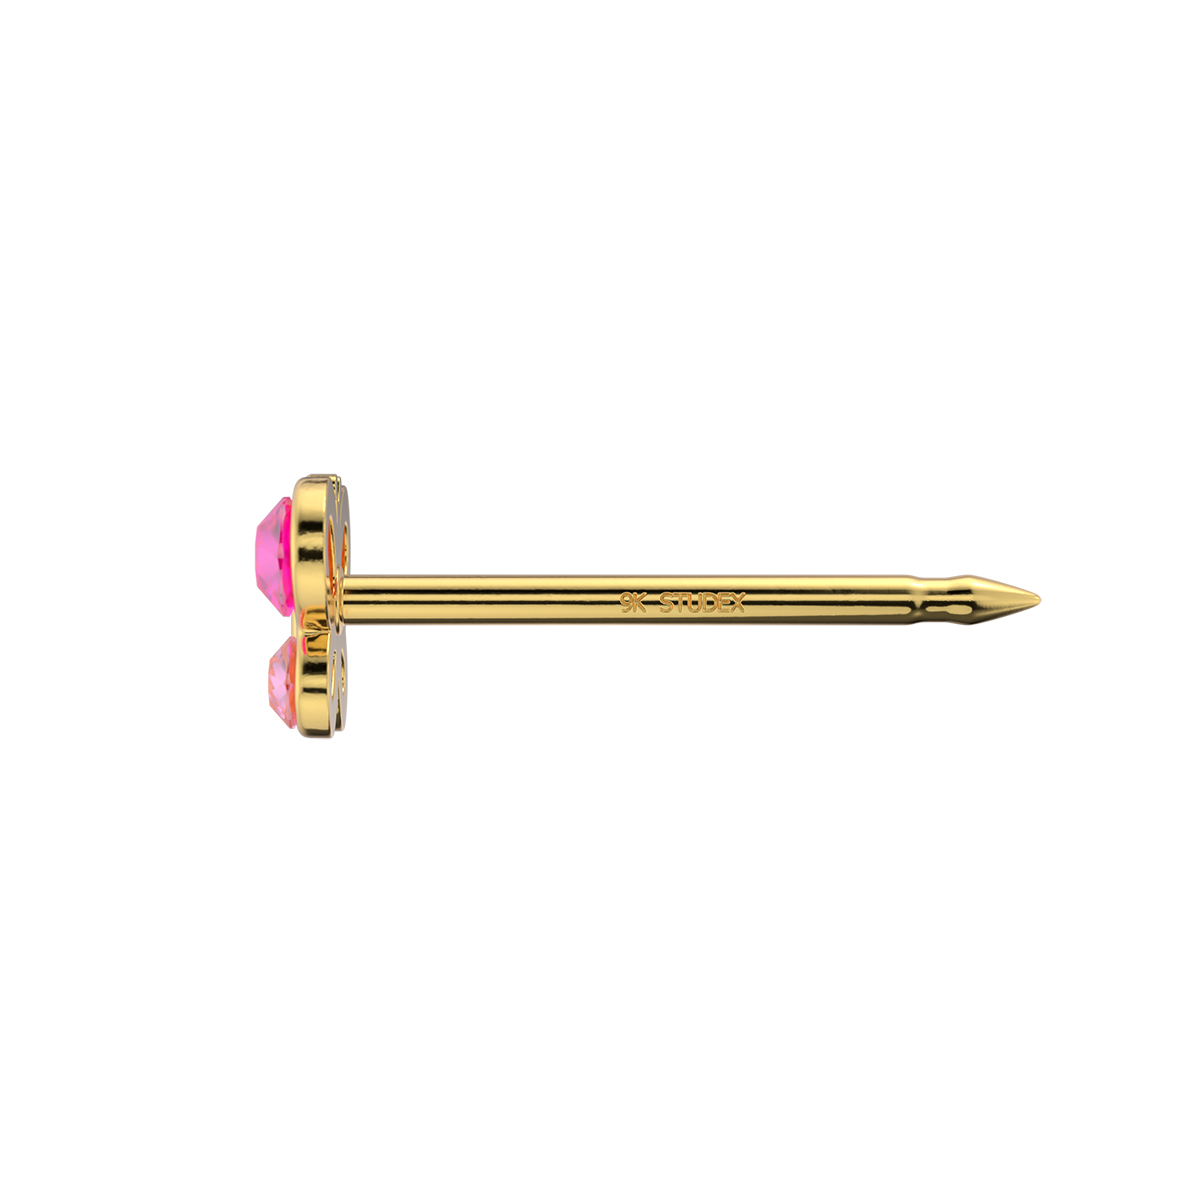 System 75 ear studs, 9 ct yellow gold